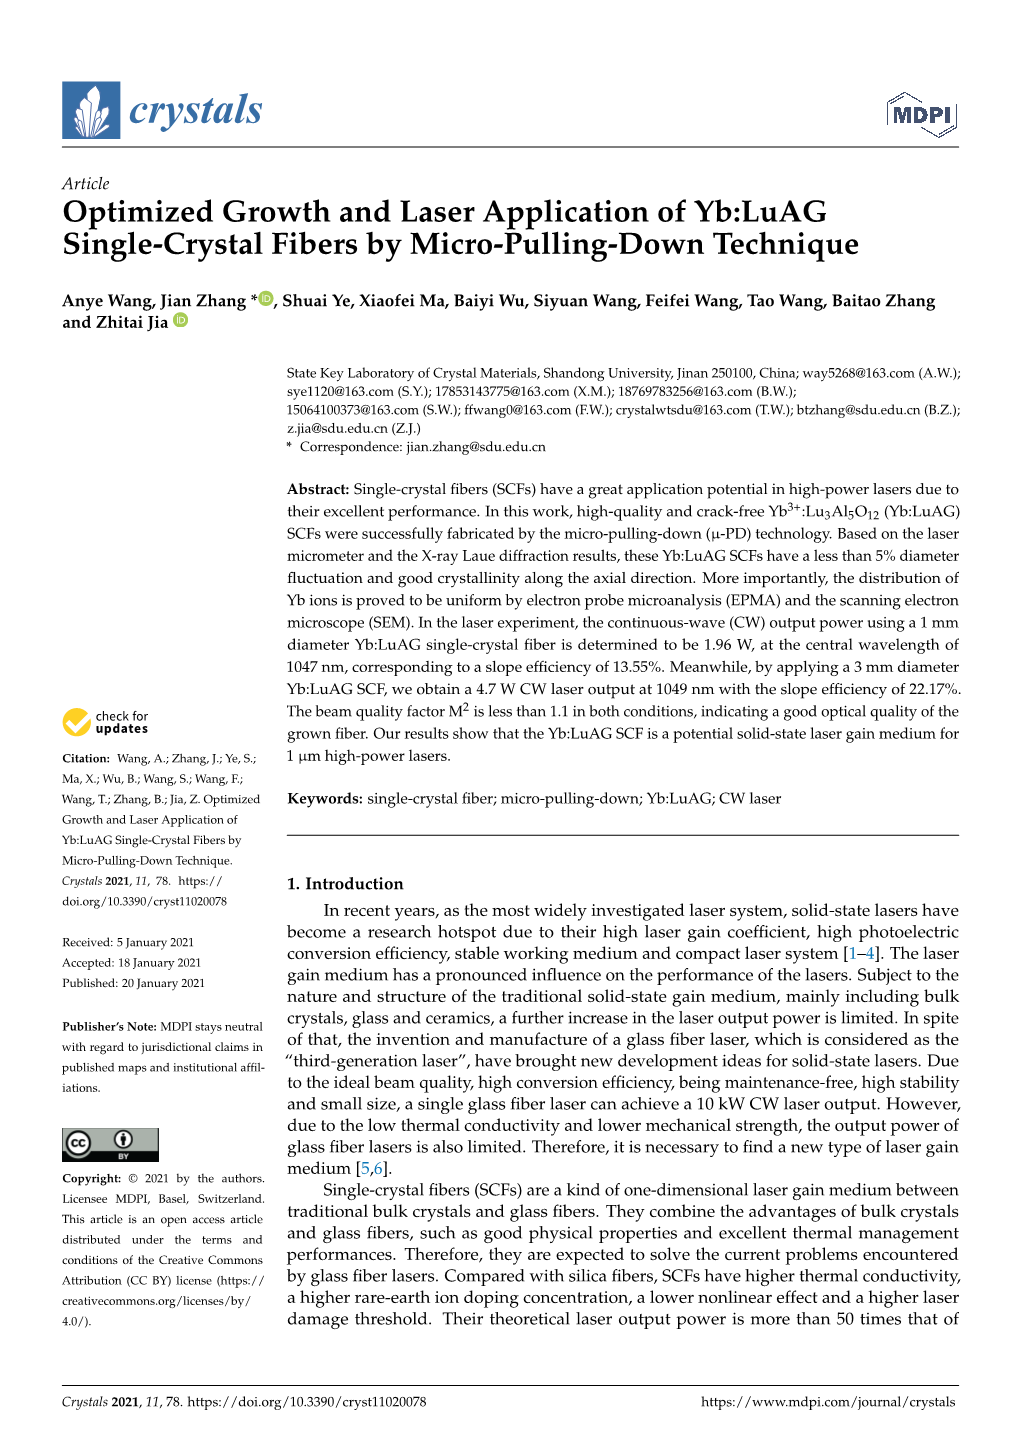 Optimized Growth and Laser Application of Yb:Luag Single-Crystal Fibers by Micro-Pulling-Down Technique